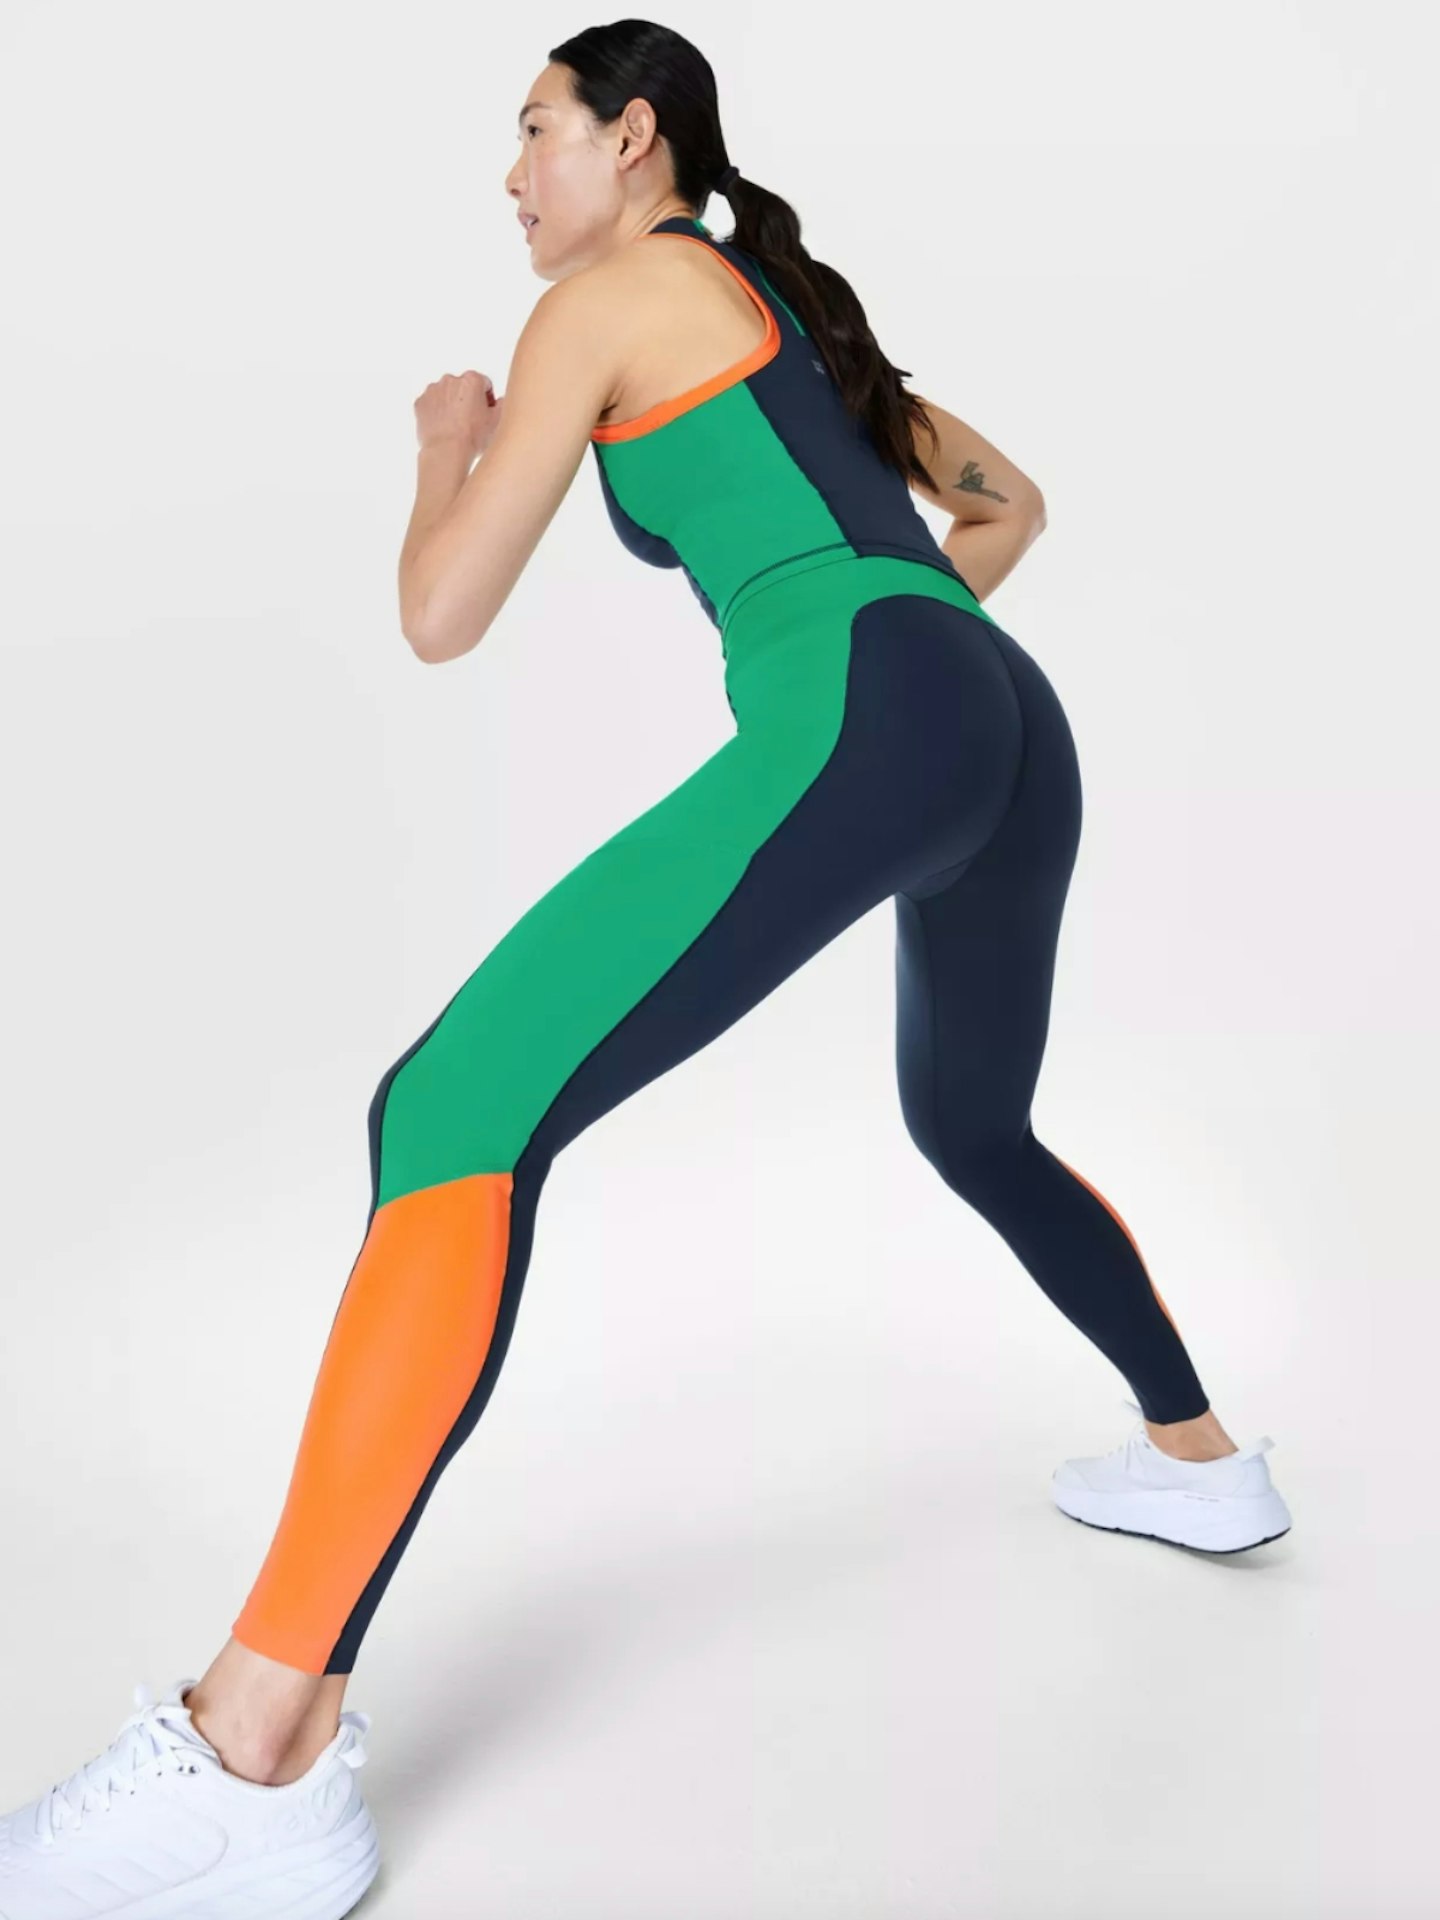 These Butt-lifting Leggings Are Outselling the Viral TikTok